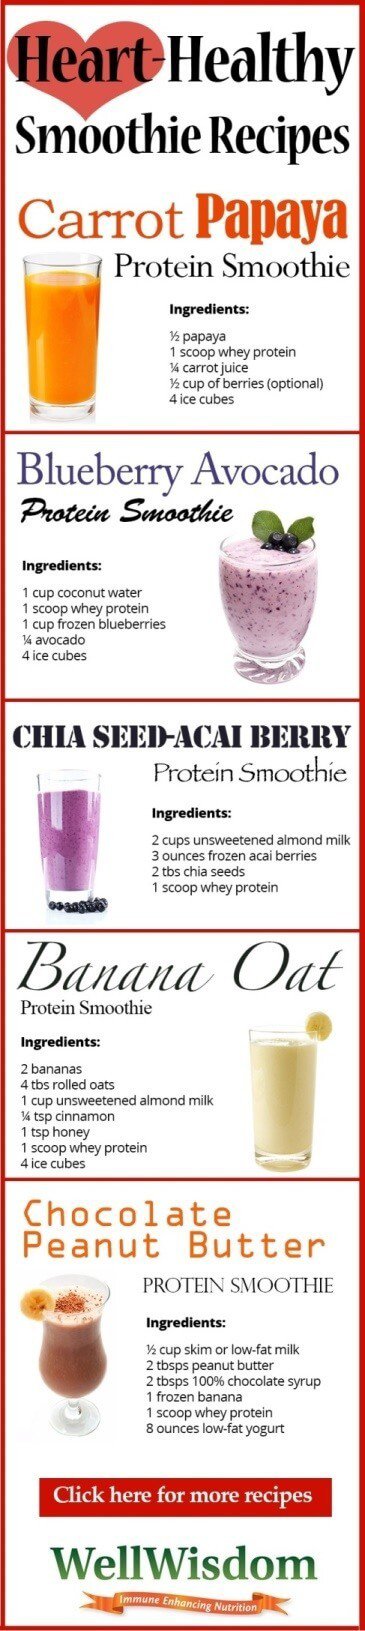 Smoothie recipe Infographic cheat sheet